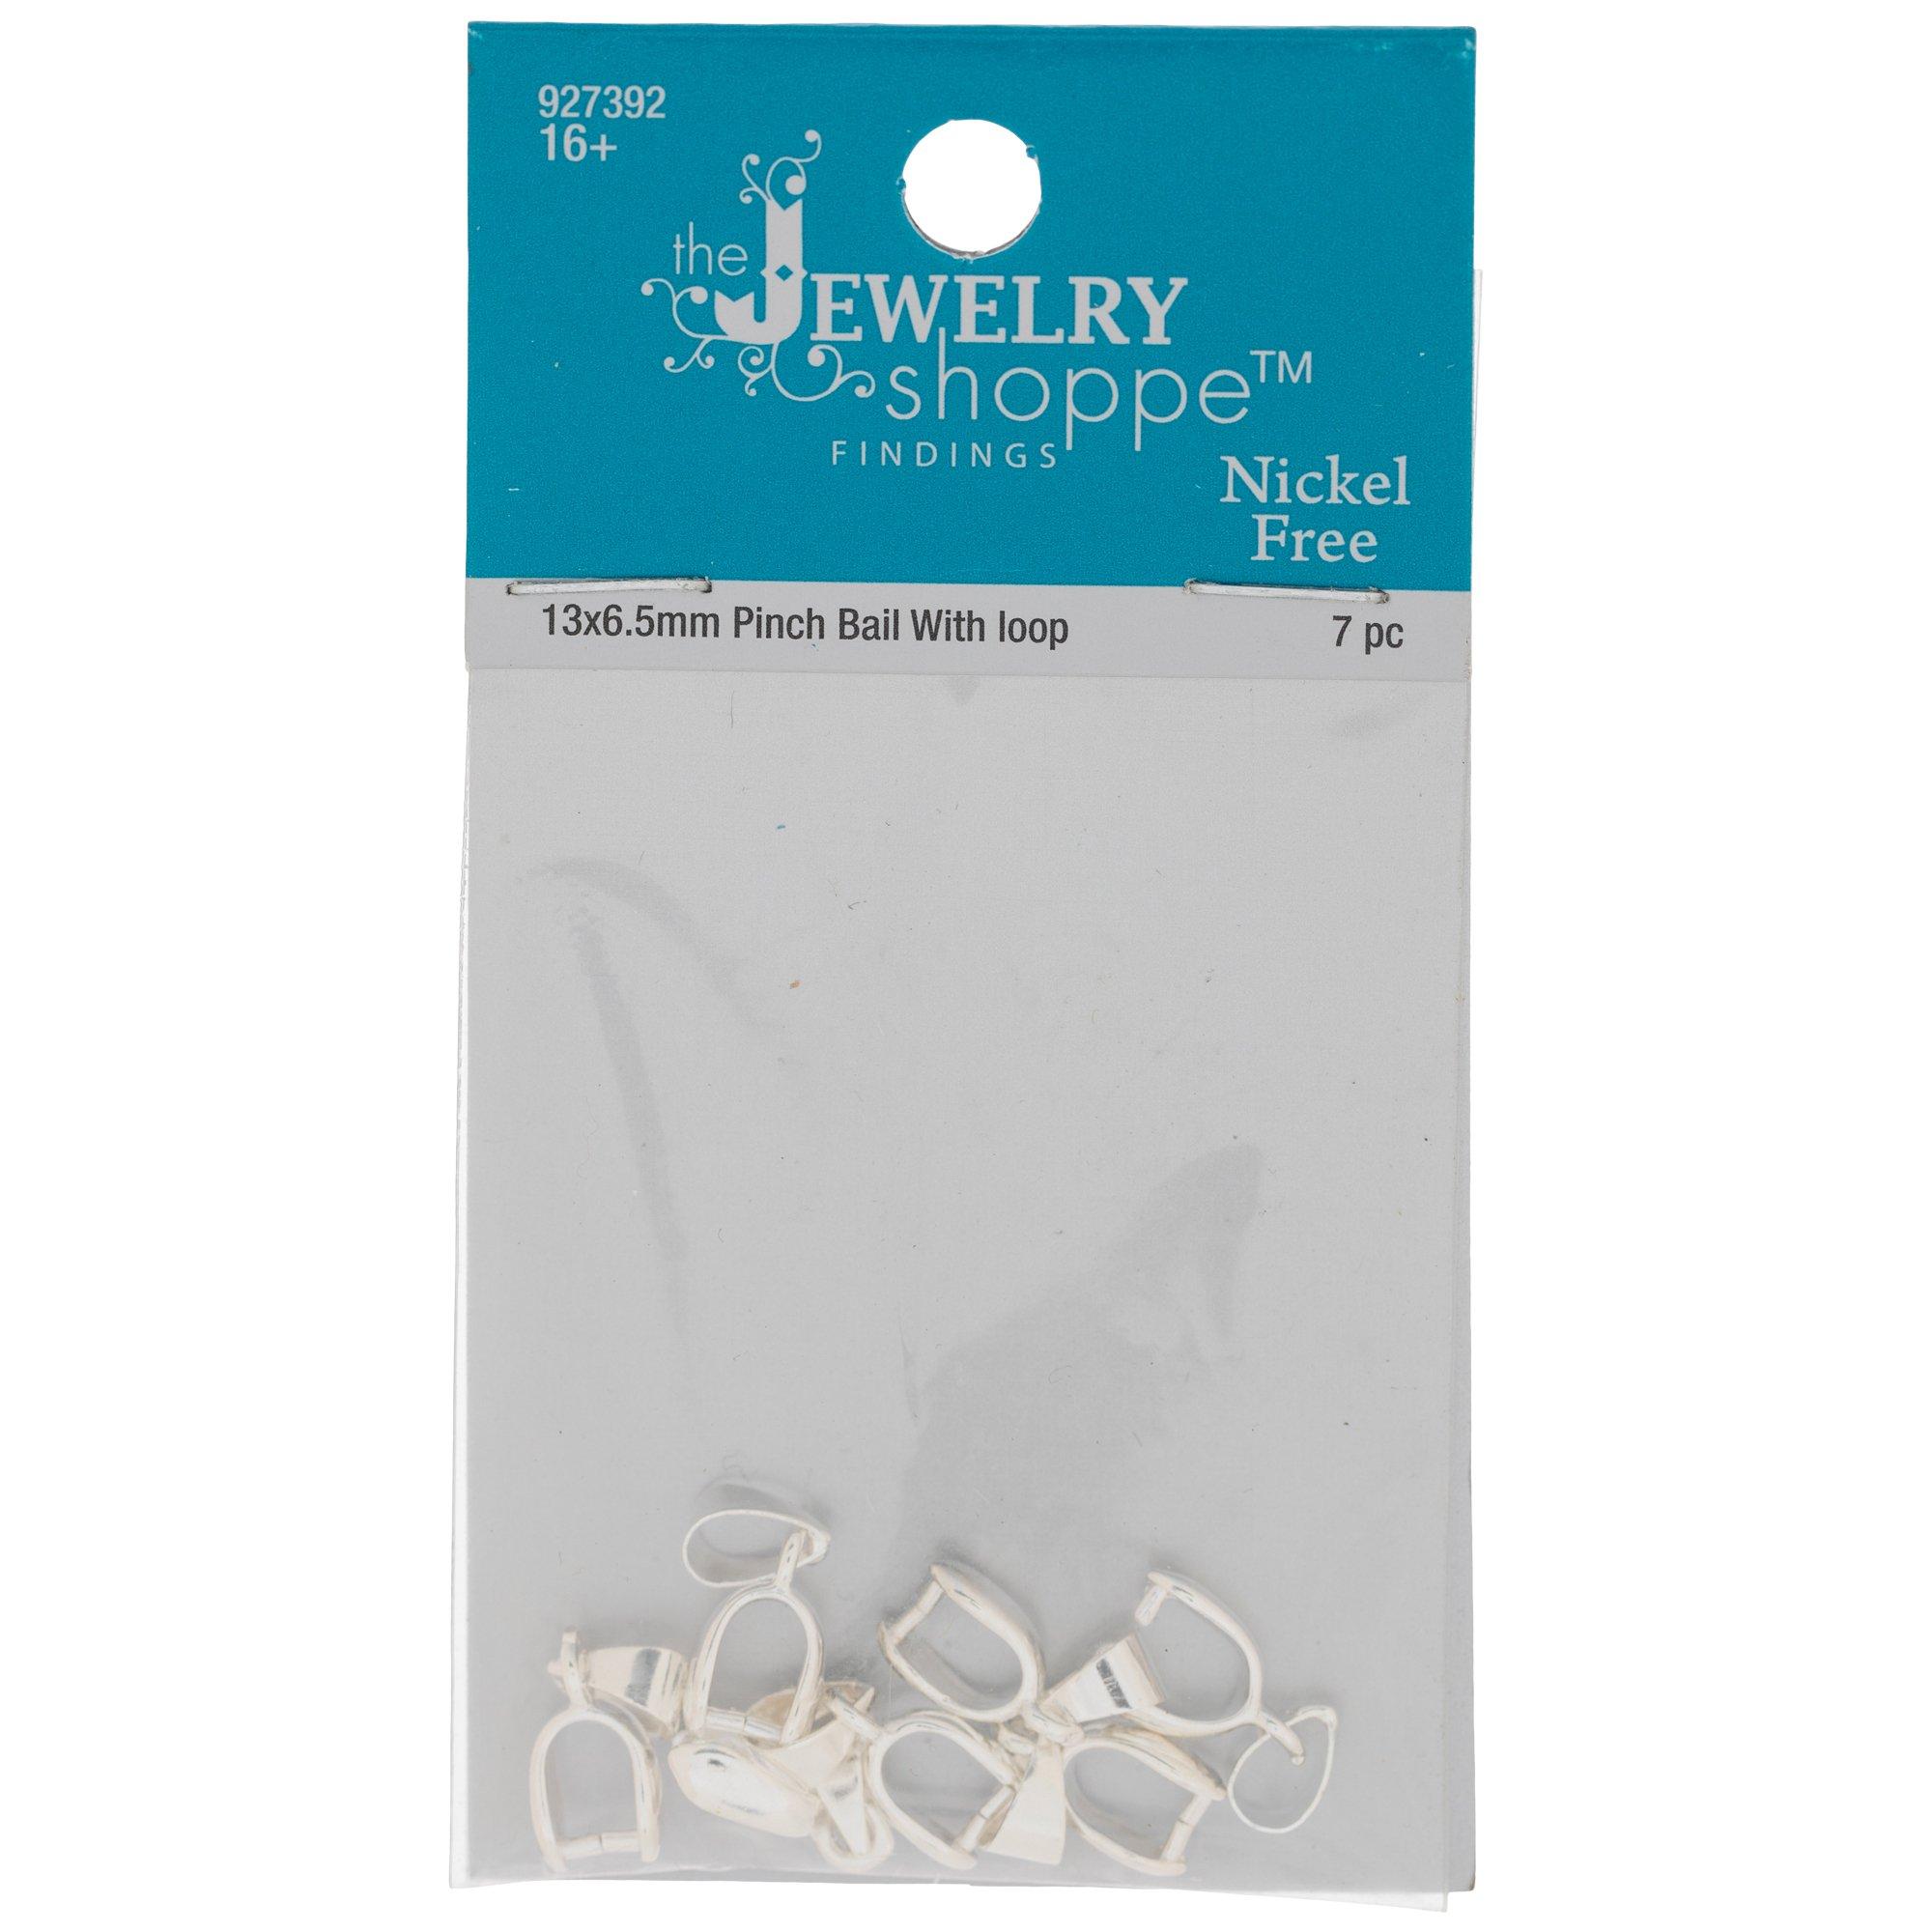 Pinch Bails With Loops - 13mm x 6.5mm, Hobby Lobby